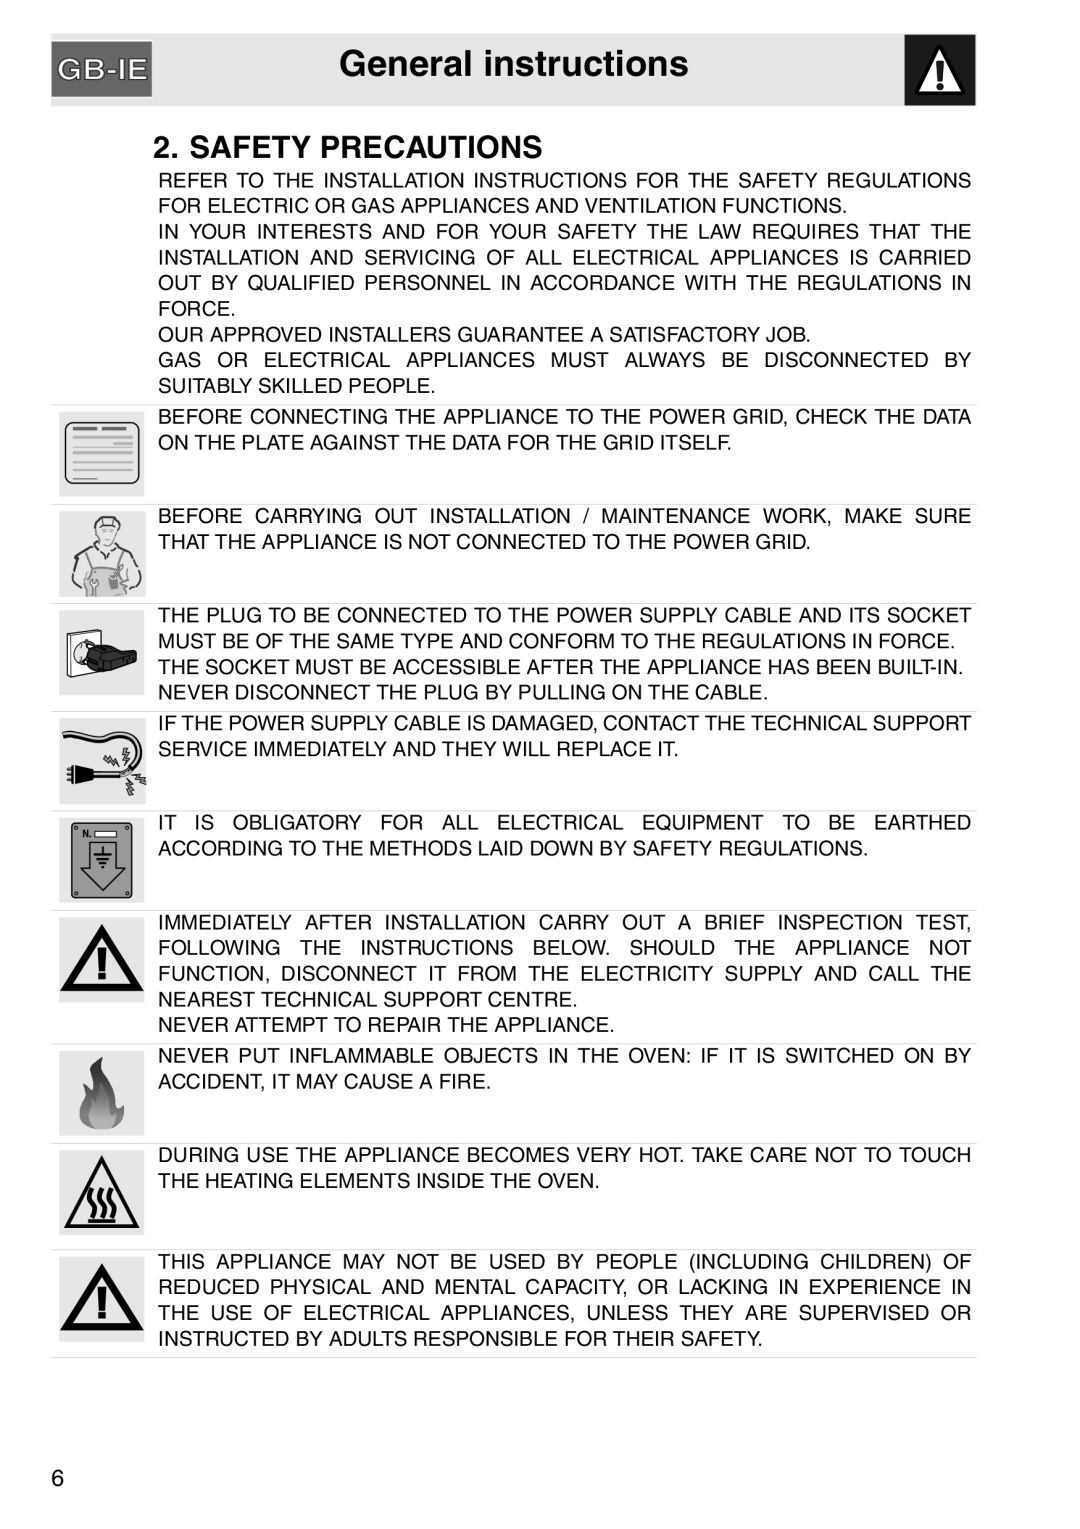 Smeg SAP306X-9, electric oven installation instructions Safety Precautions, General instructions 